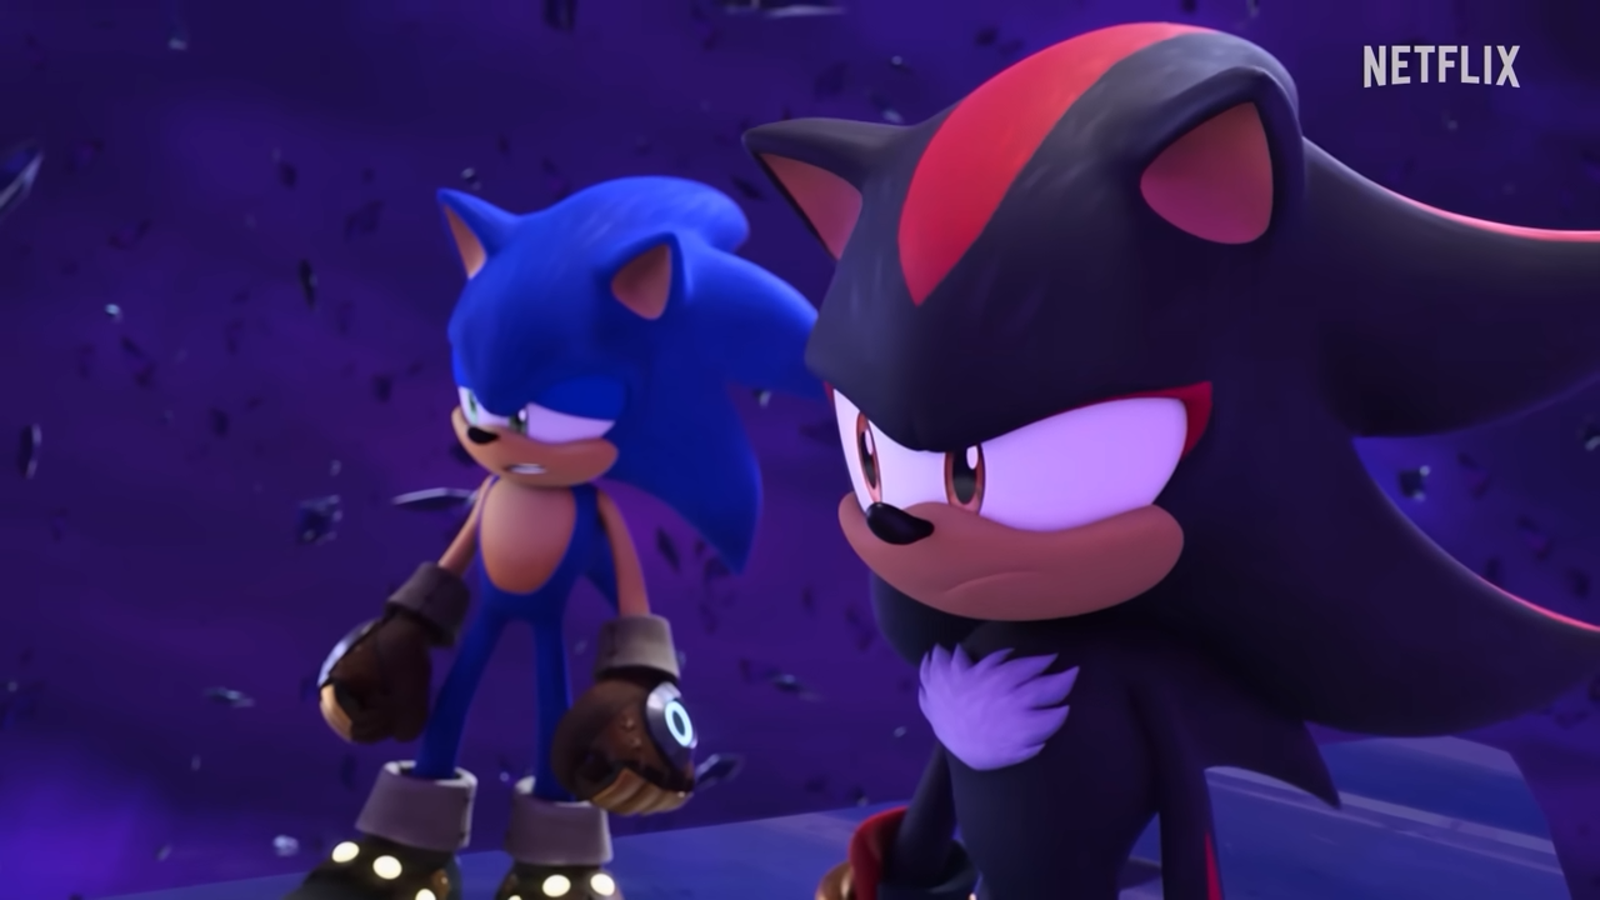 IGN - Sonic Prime's second season proves to be an engaging and, in